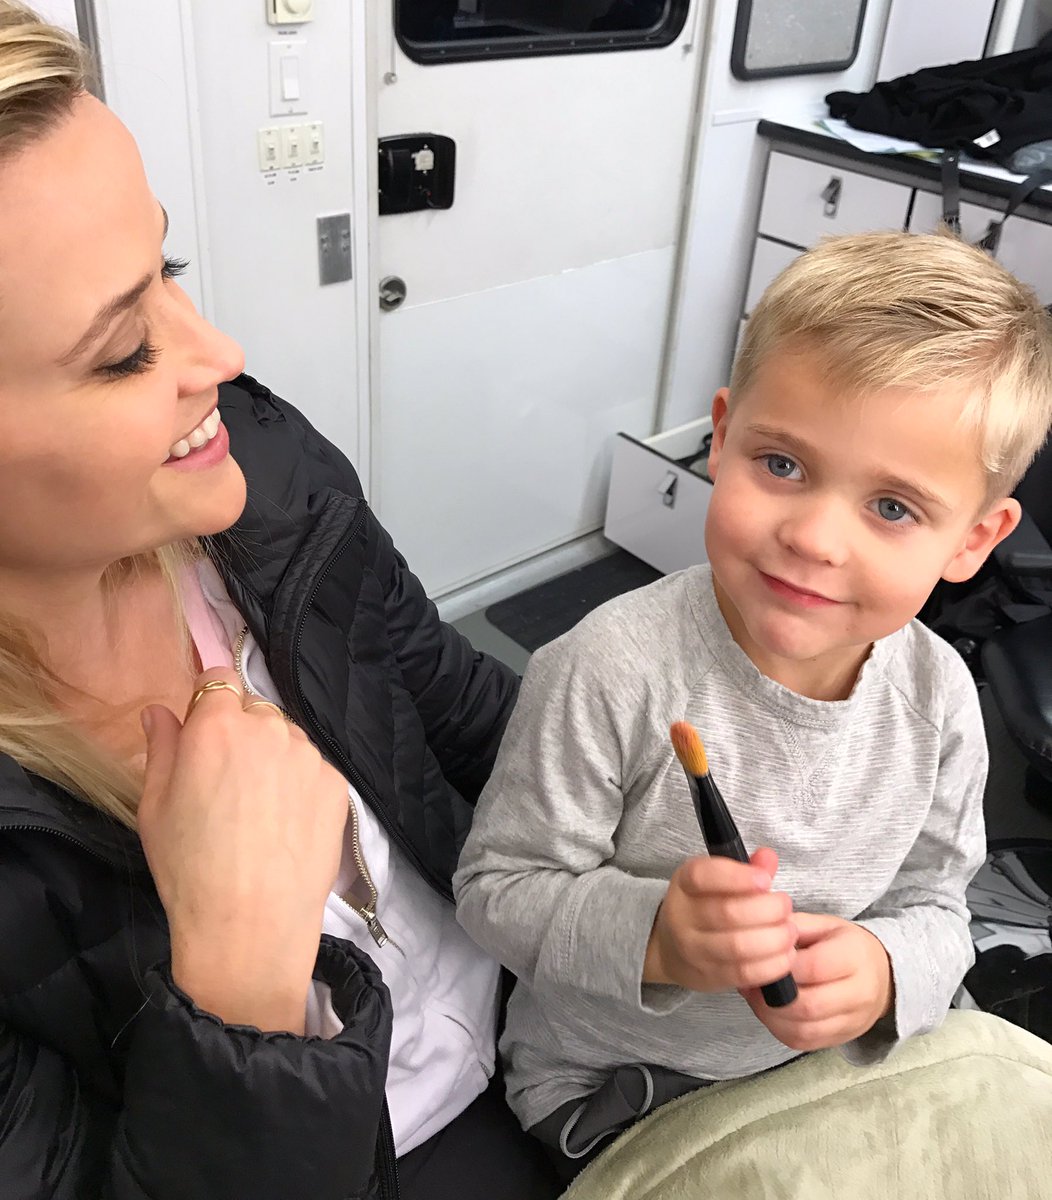 Introducing my new makeup man ❤️ #OnSet #HomeAgainMovie https://t.co/v7WxZw5Jns